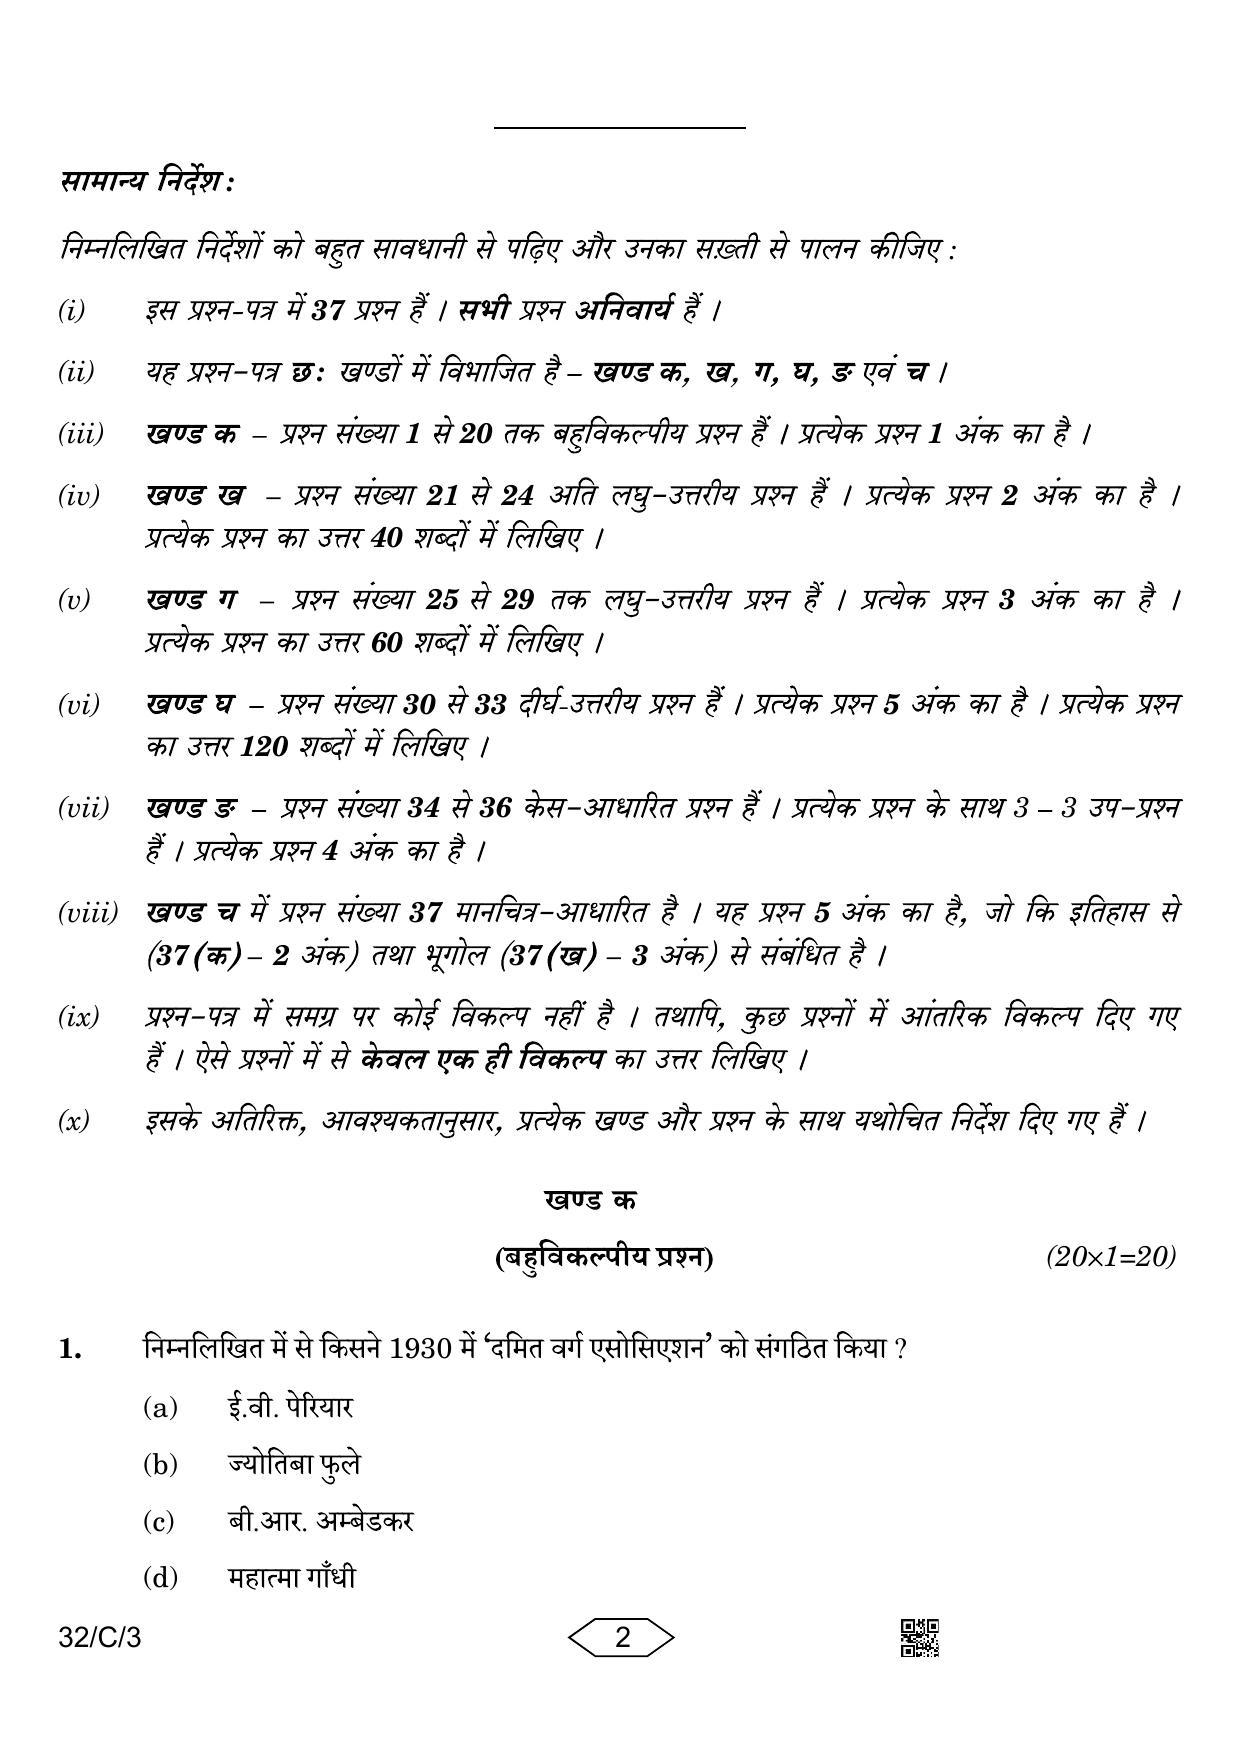 CBSE Class 10 32-3 Social Science 2023 (Compartment) Question Paper - Page 2